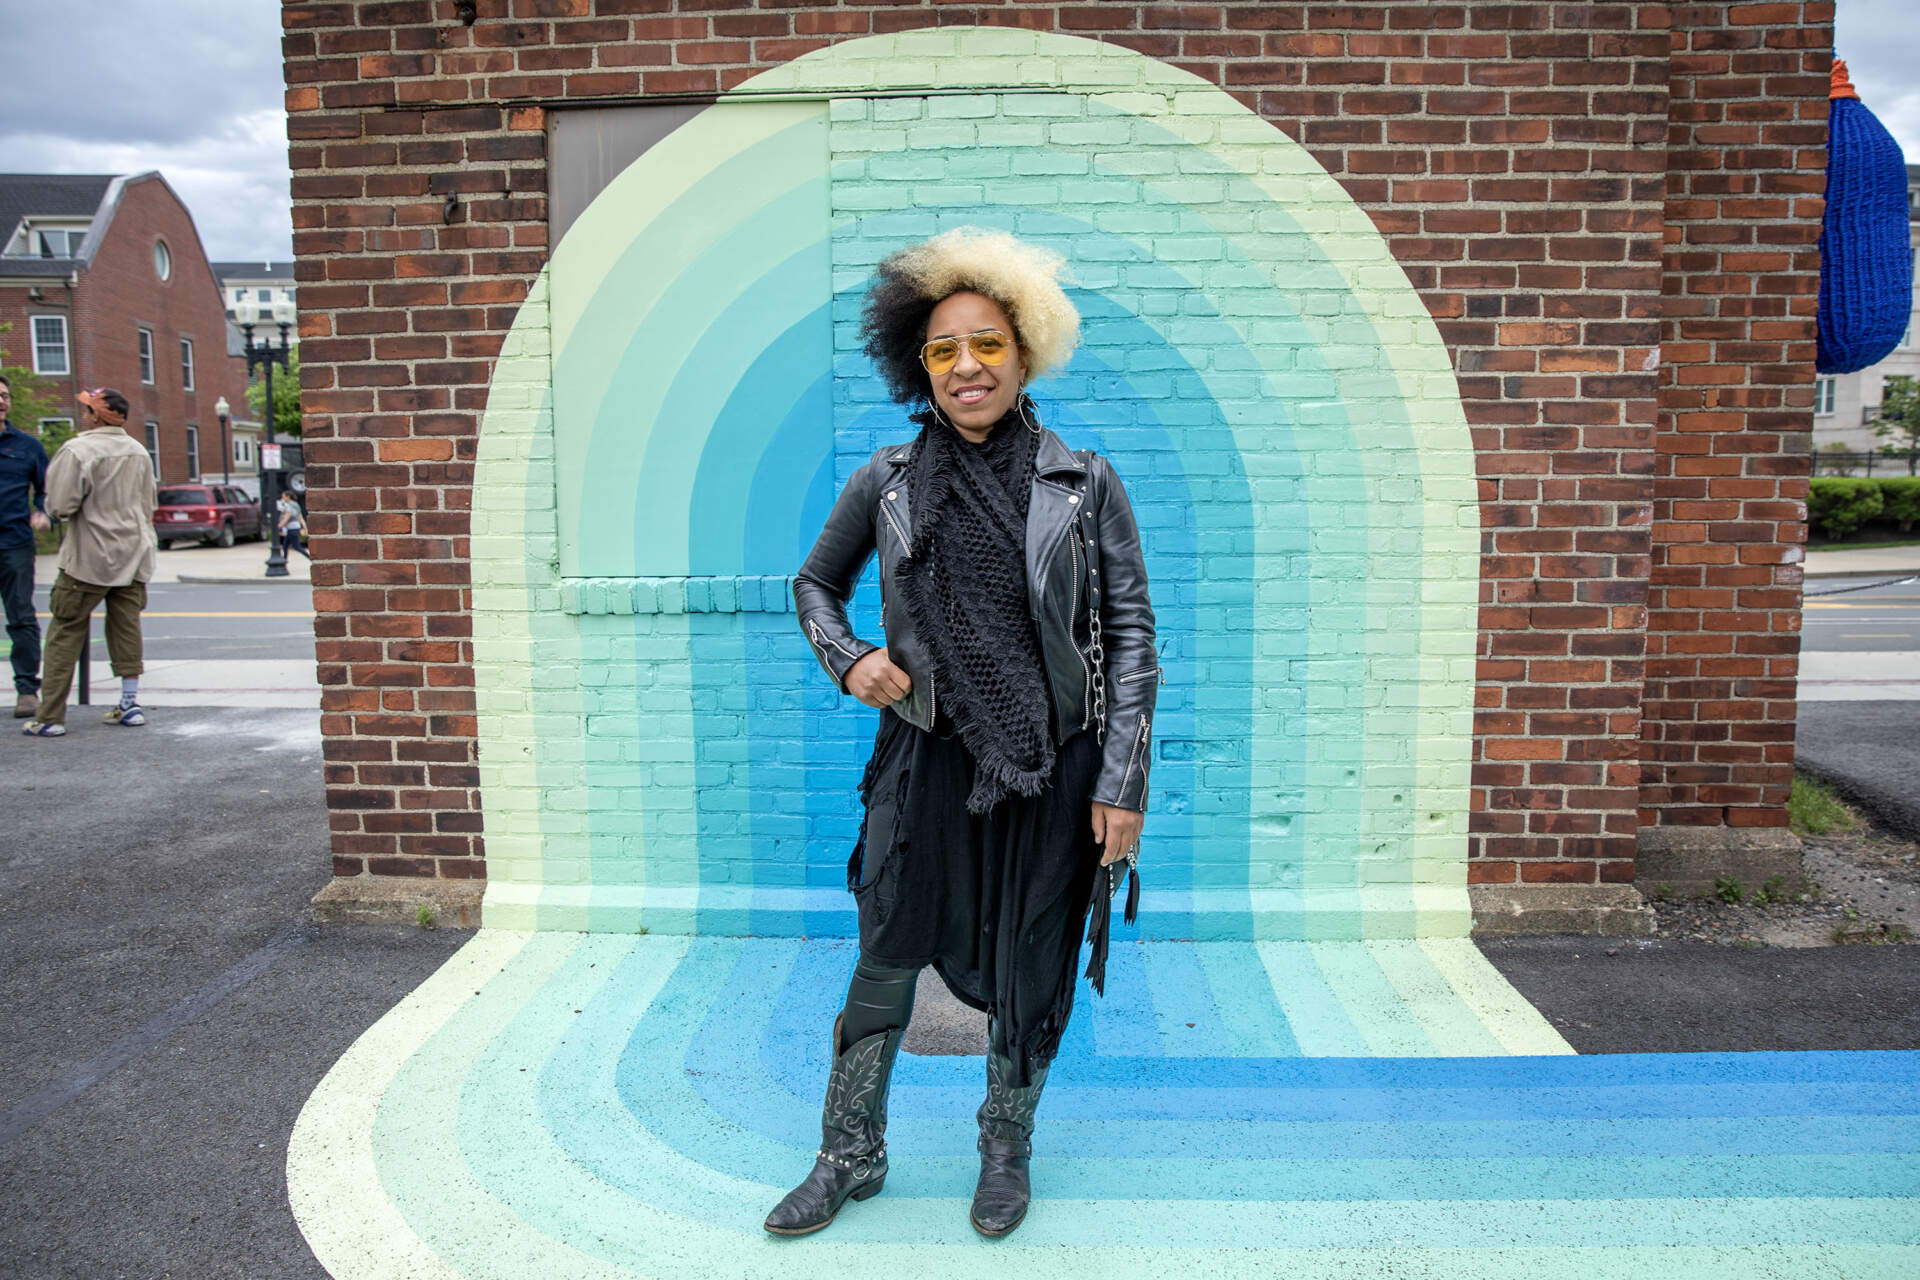 Artist Massiel Grullón stands at one end of her ground mural “Knotical Waves” at Lot Lab, near the Charlestown Navy Yard. (Robin Lubbock/WBUR)